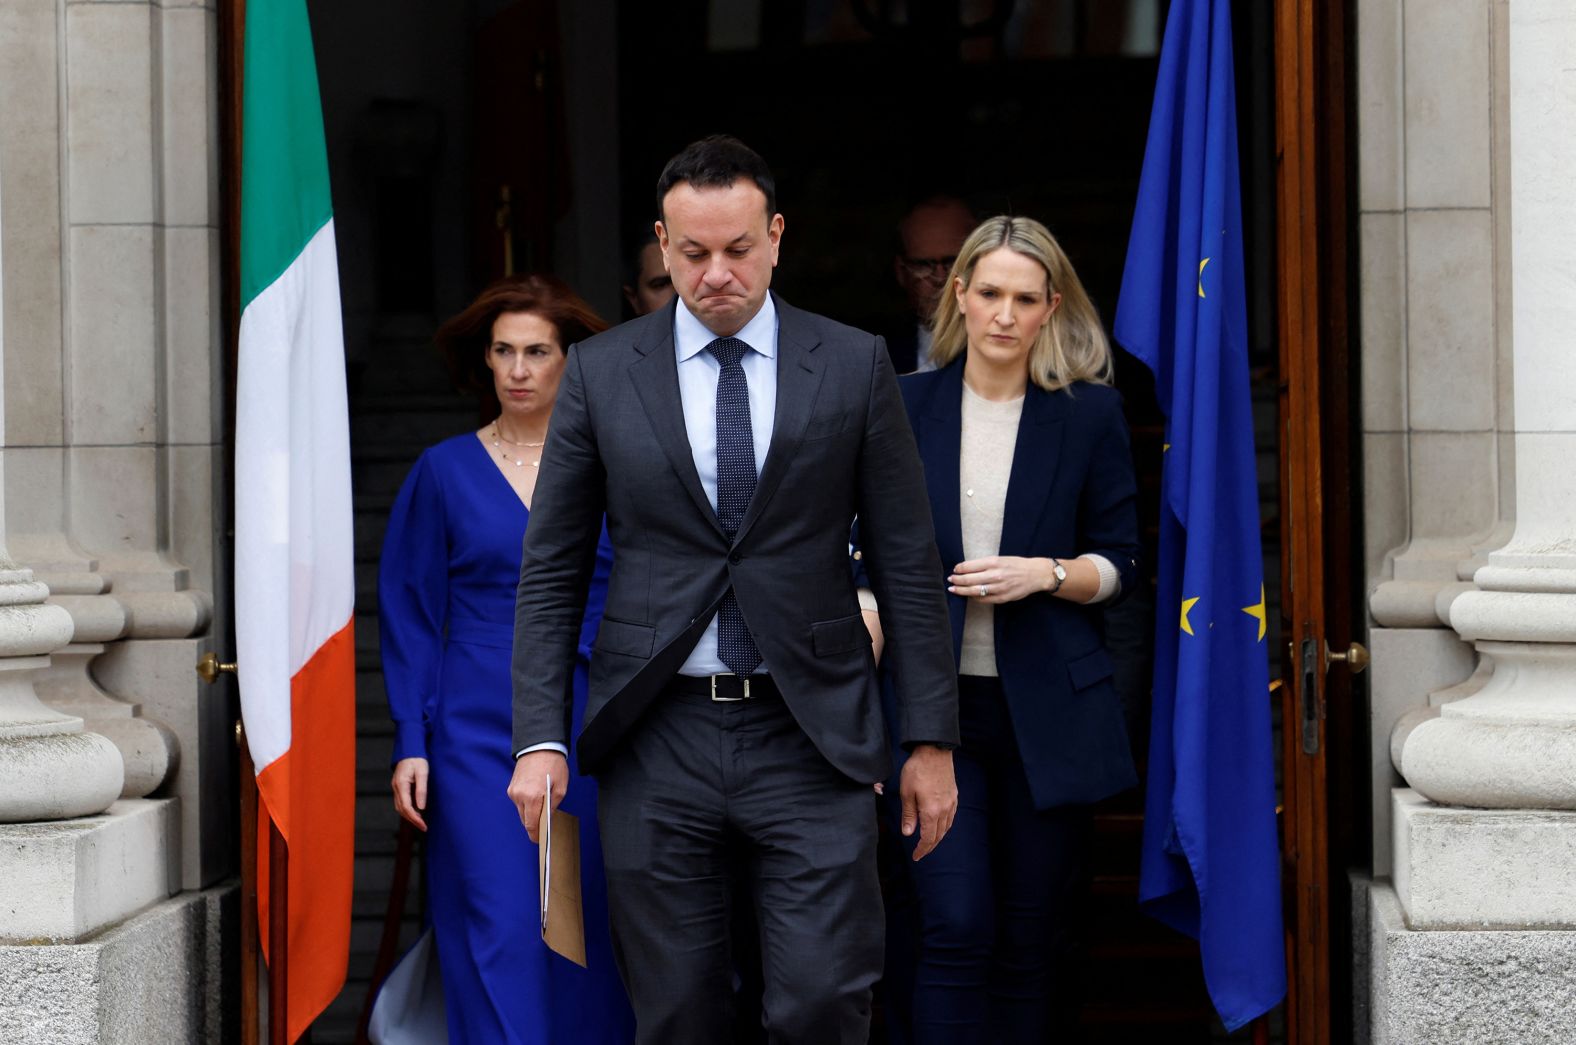 Ireland's Prime Minister <a href="https://www.cnn.com/2024/03/20/europe/leo-varadkar-ireland-prime-minister-resignation-intl/index.html" target="_blank">Leo Varadkar arrives to announce his resignation</a> in Dublin on Wednesday, March 20. Varadkar cited "personal and political, but mainly political reasons." He is the country's youngest premier and Ireland's first gay leader.